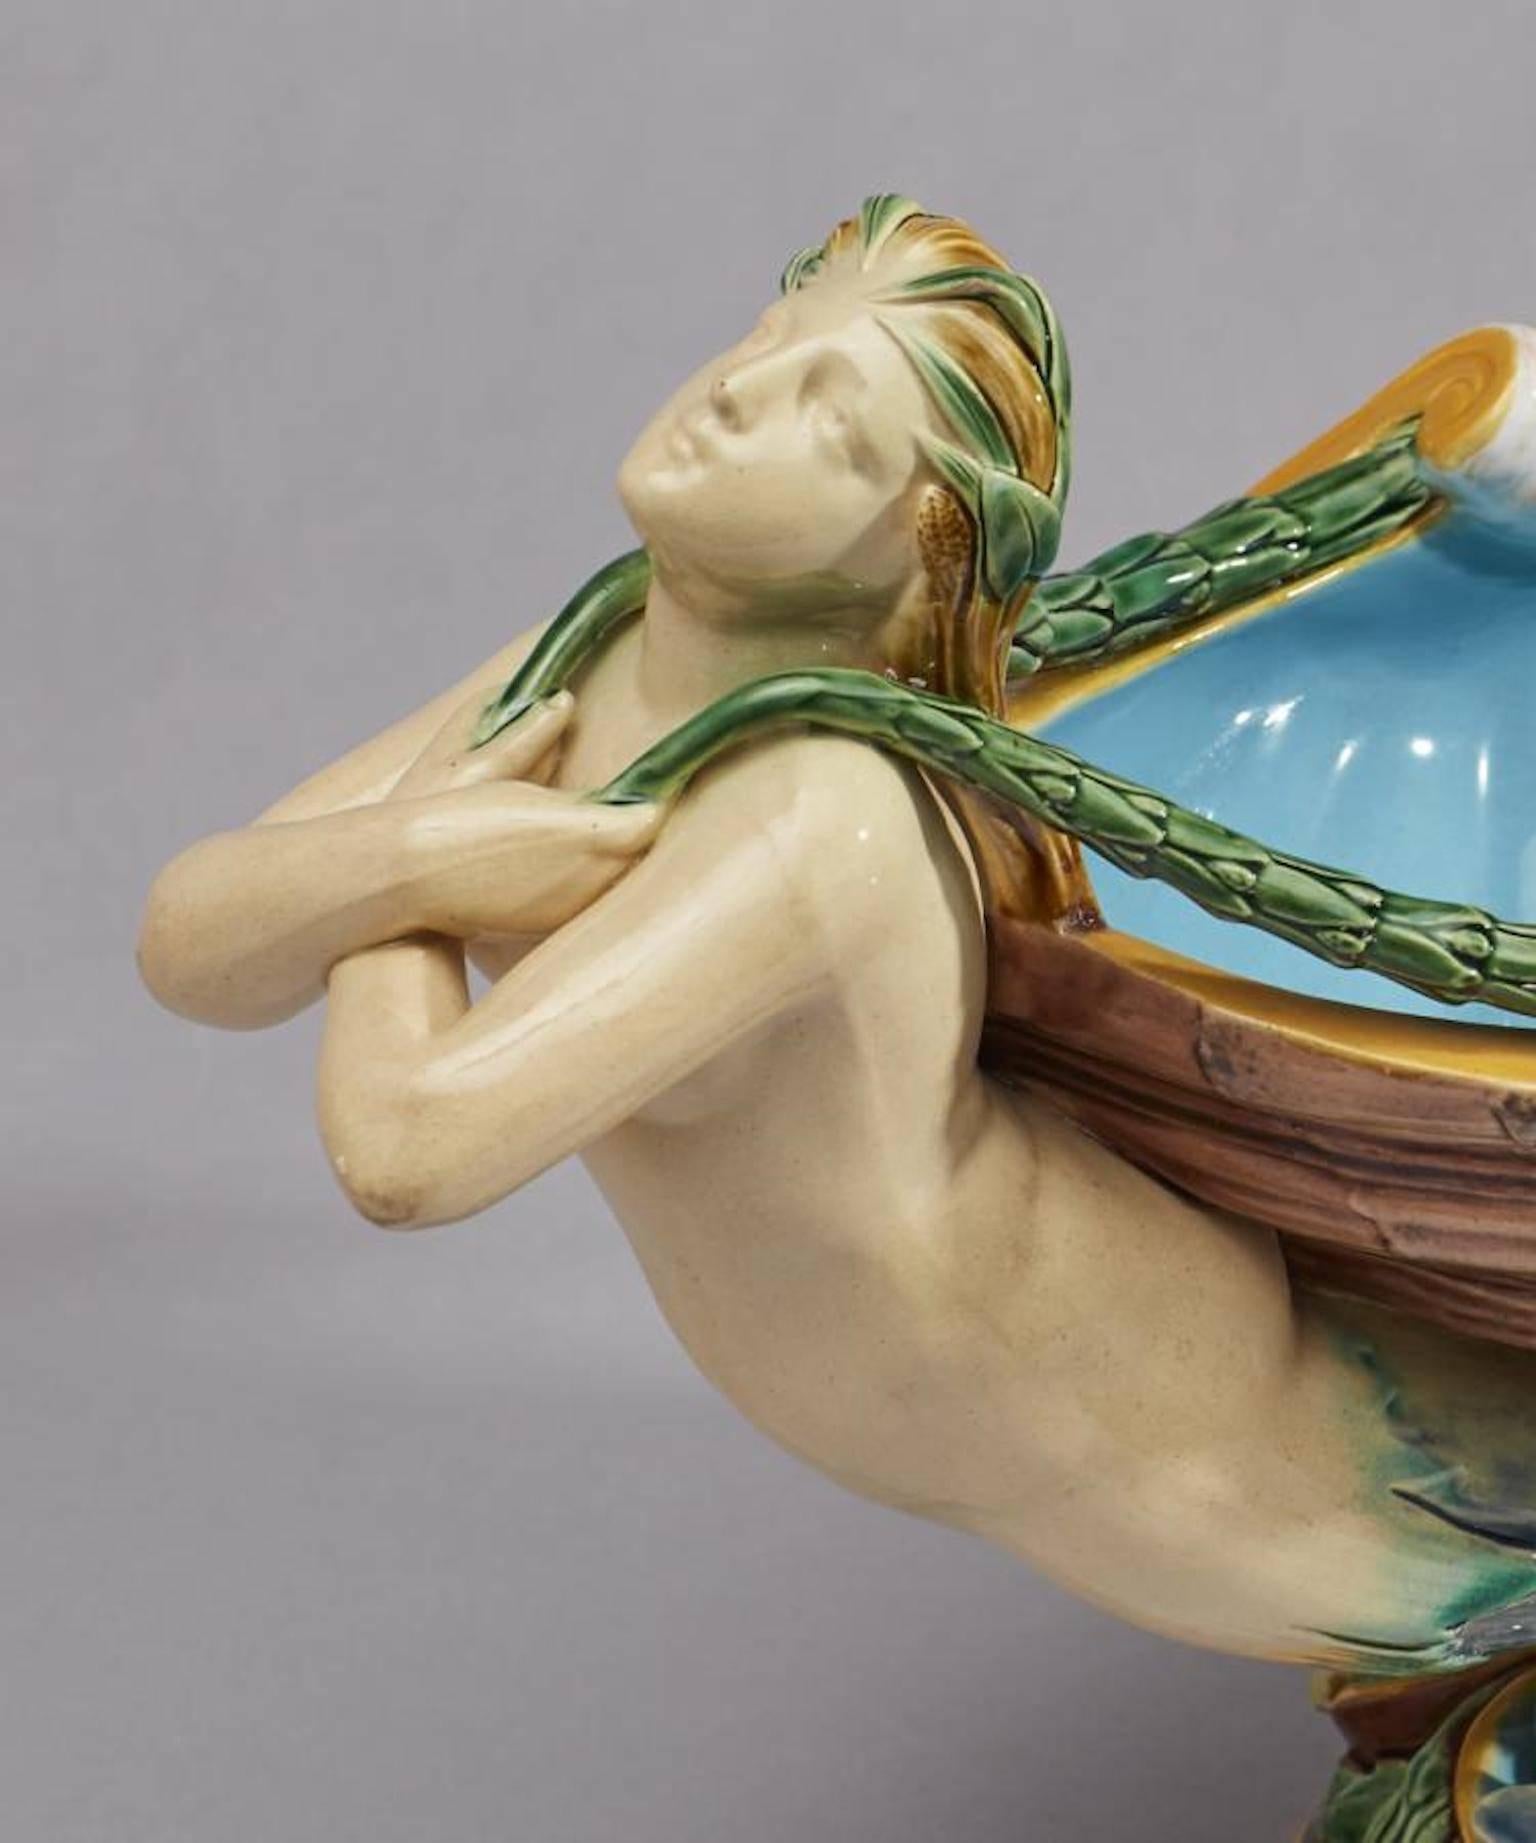 19th Century Minton Majolica Shell Form Mermaid Centerpiece For Sale 3